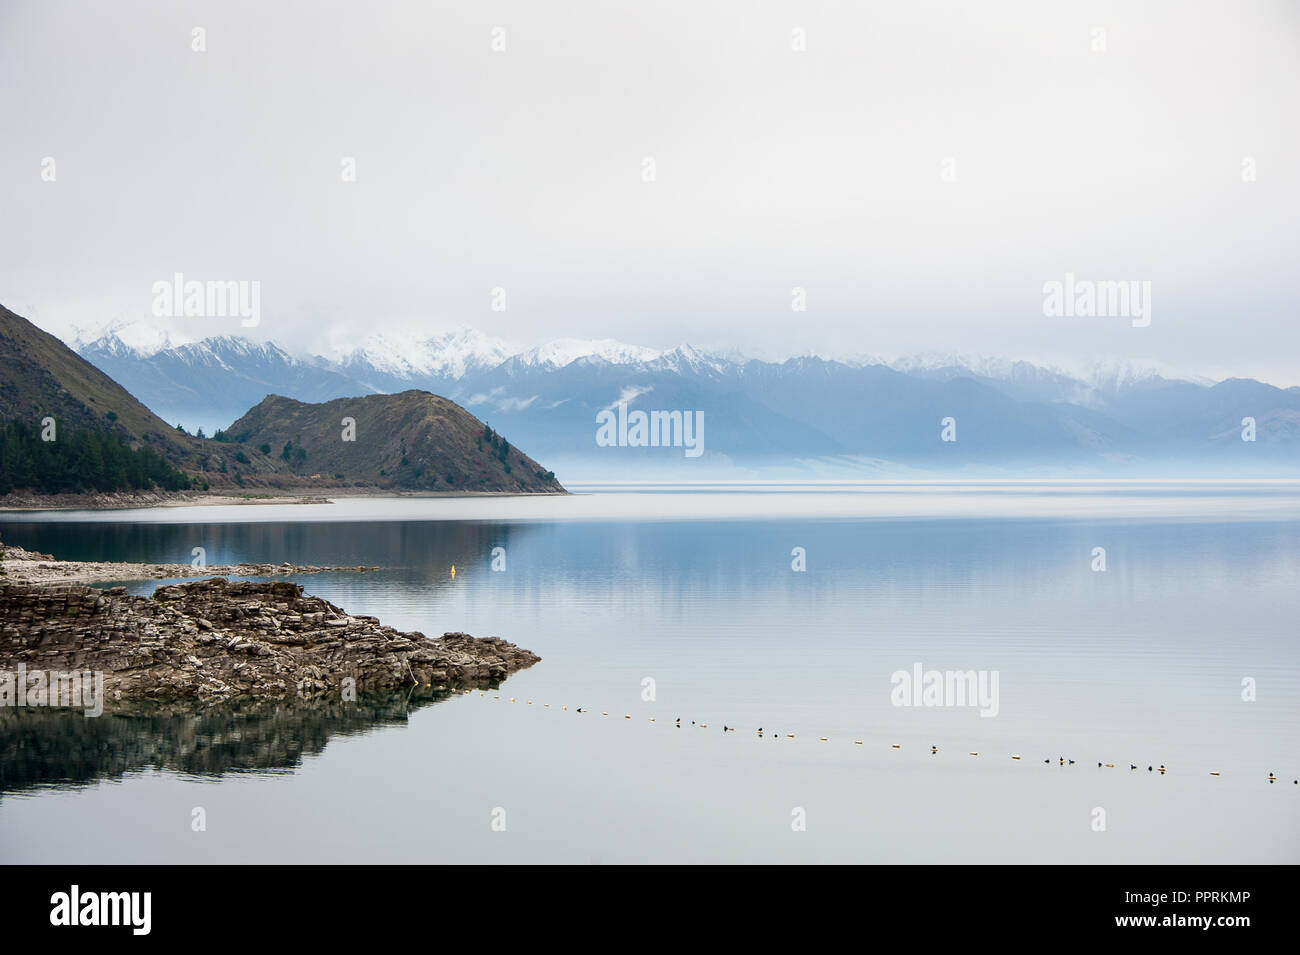 Peaceful scene on Lake Hawea, New Zealand. Soft grey tones, calm water and a mountain background. Stock Photo